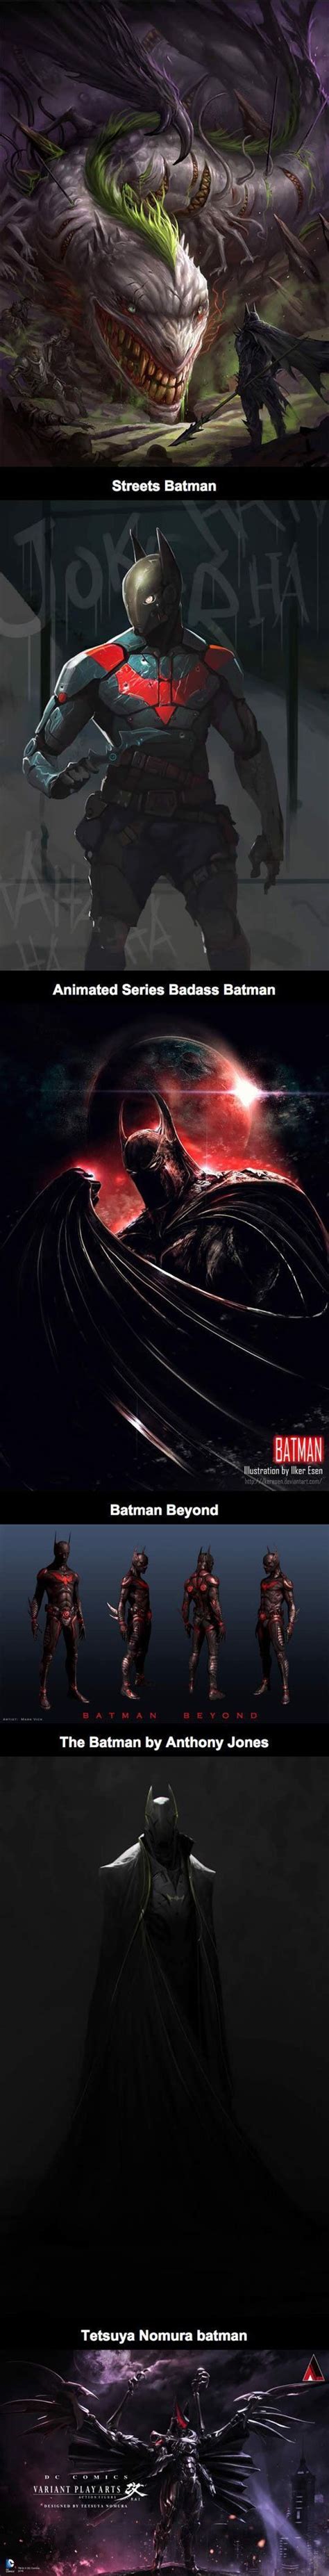 Awesome Alternate Fan Art Takes On Batman The Meta Picture Comic Book Characters Comic Book